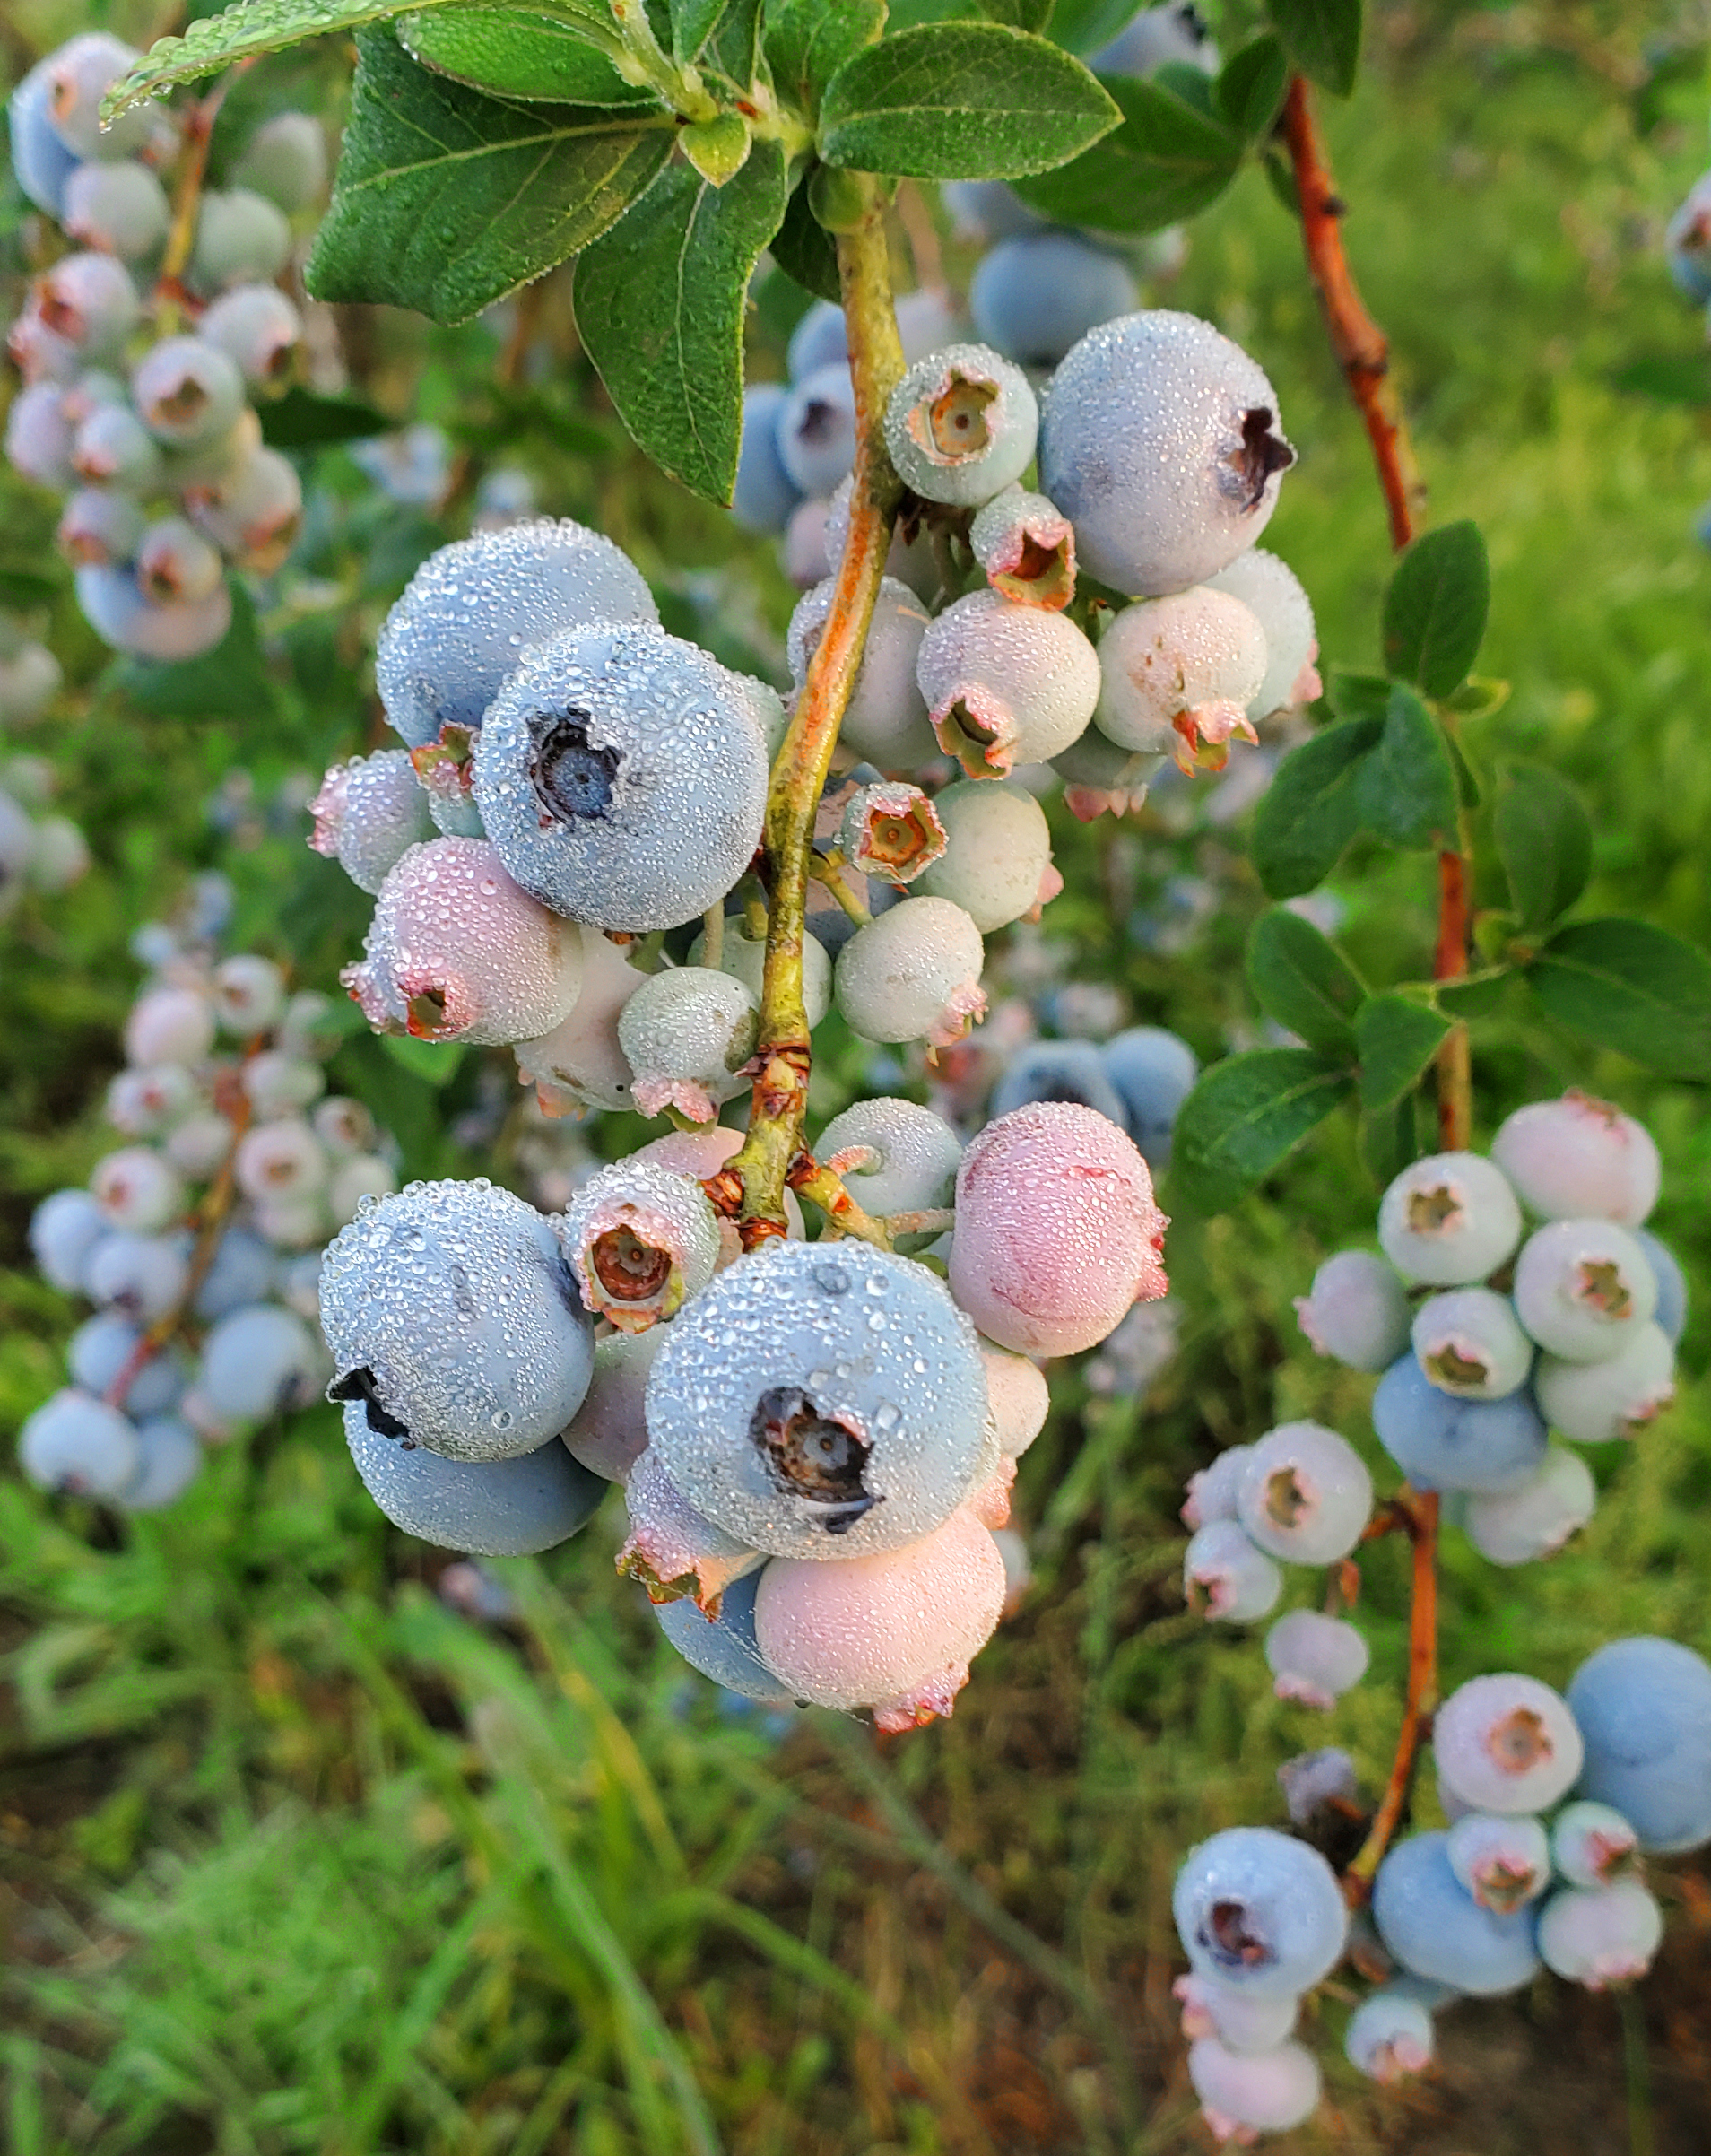 Blueberries with dew on them.